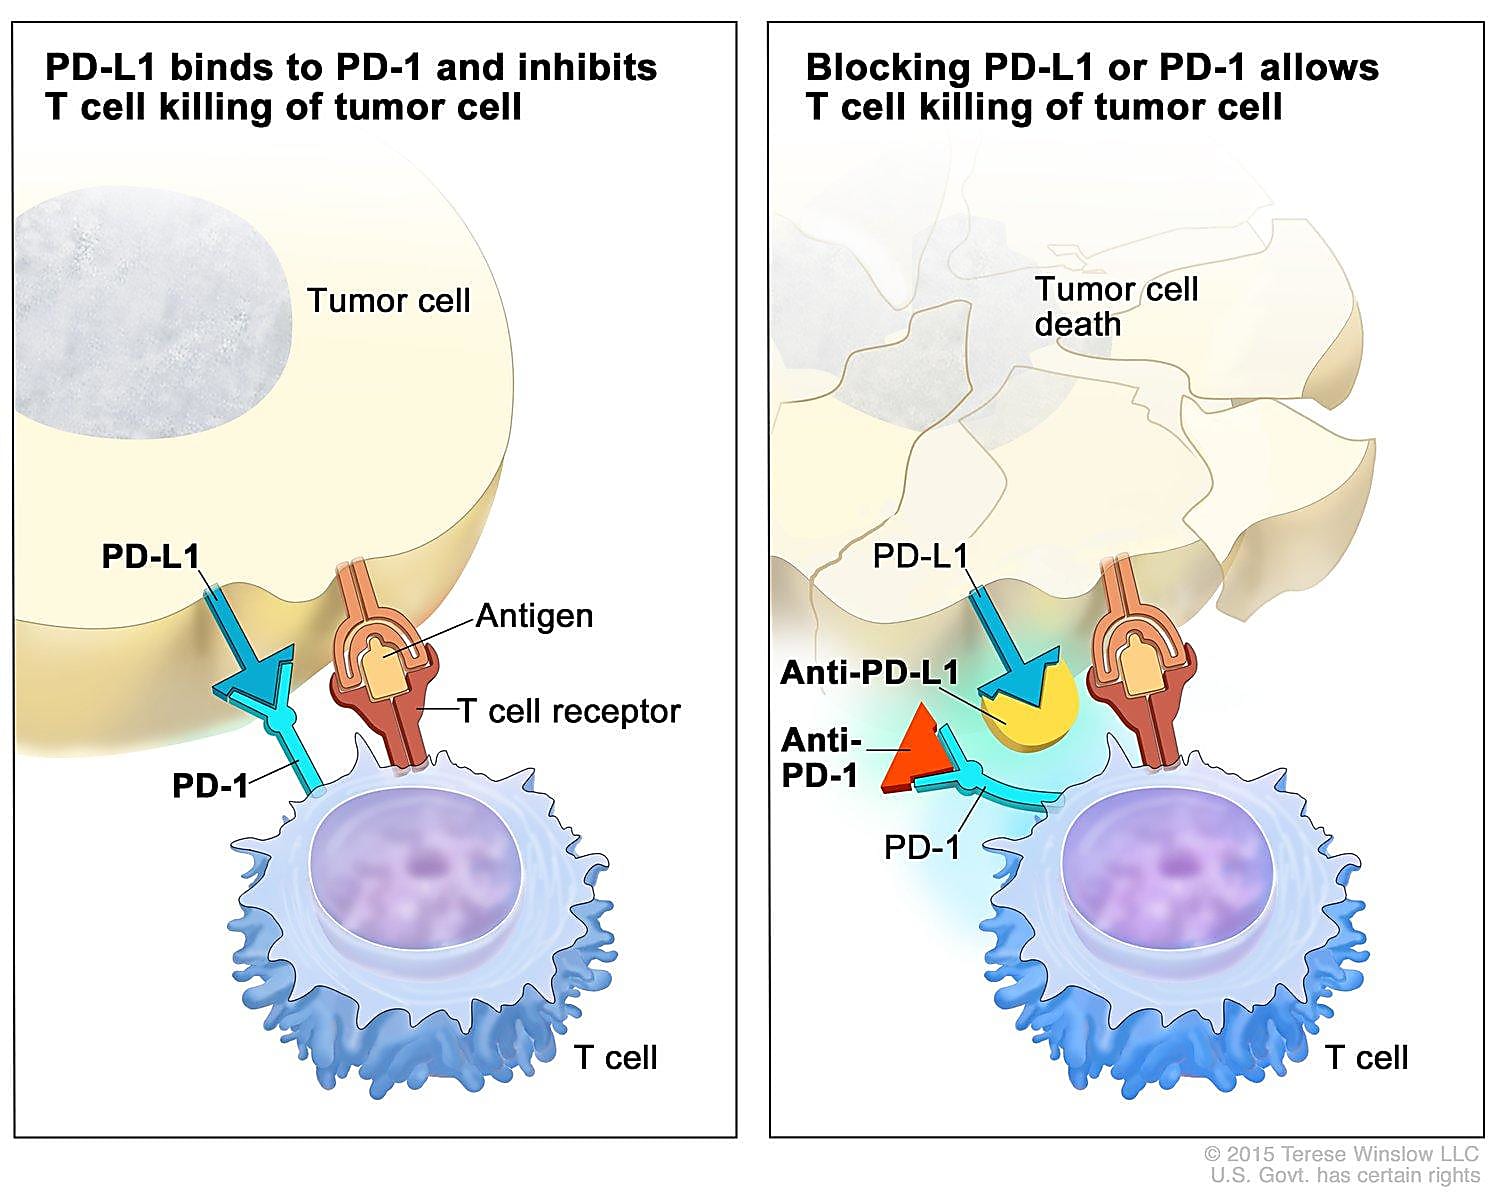 Checkpoint proteins, such as PD-L1 on tumor cells and PD-1 on T cells, help keep immune responses in check. The binding of PD-L1 to PD-1 keeps T cells from killing tumor cells in the body (left panel). Blocking the binding of PD-L1 to PD-1 with an immune checkpoint inhibitor (anti-PD-L1 or anti-PD-1) allows the T cells to kill tumor cells (right panel). Credit: National Cancer Institute.